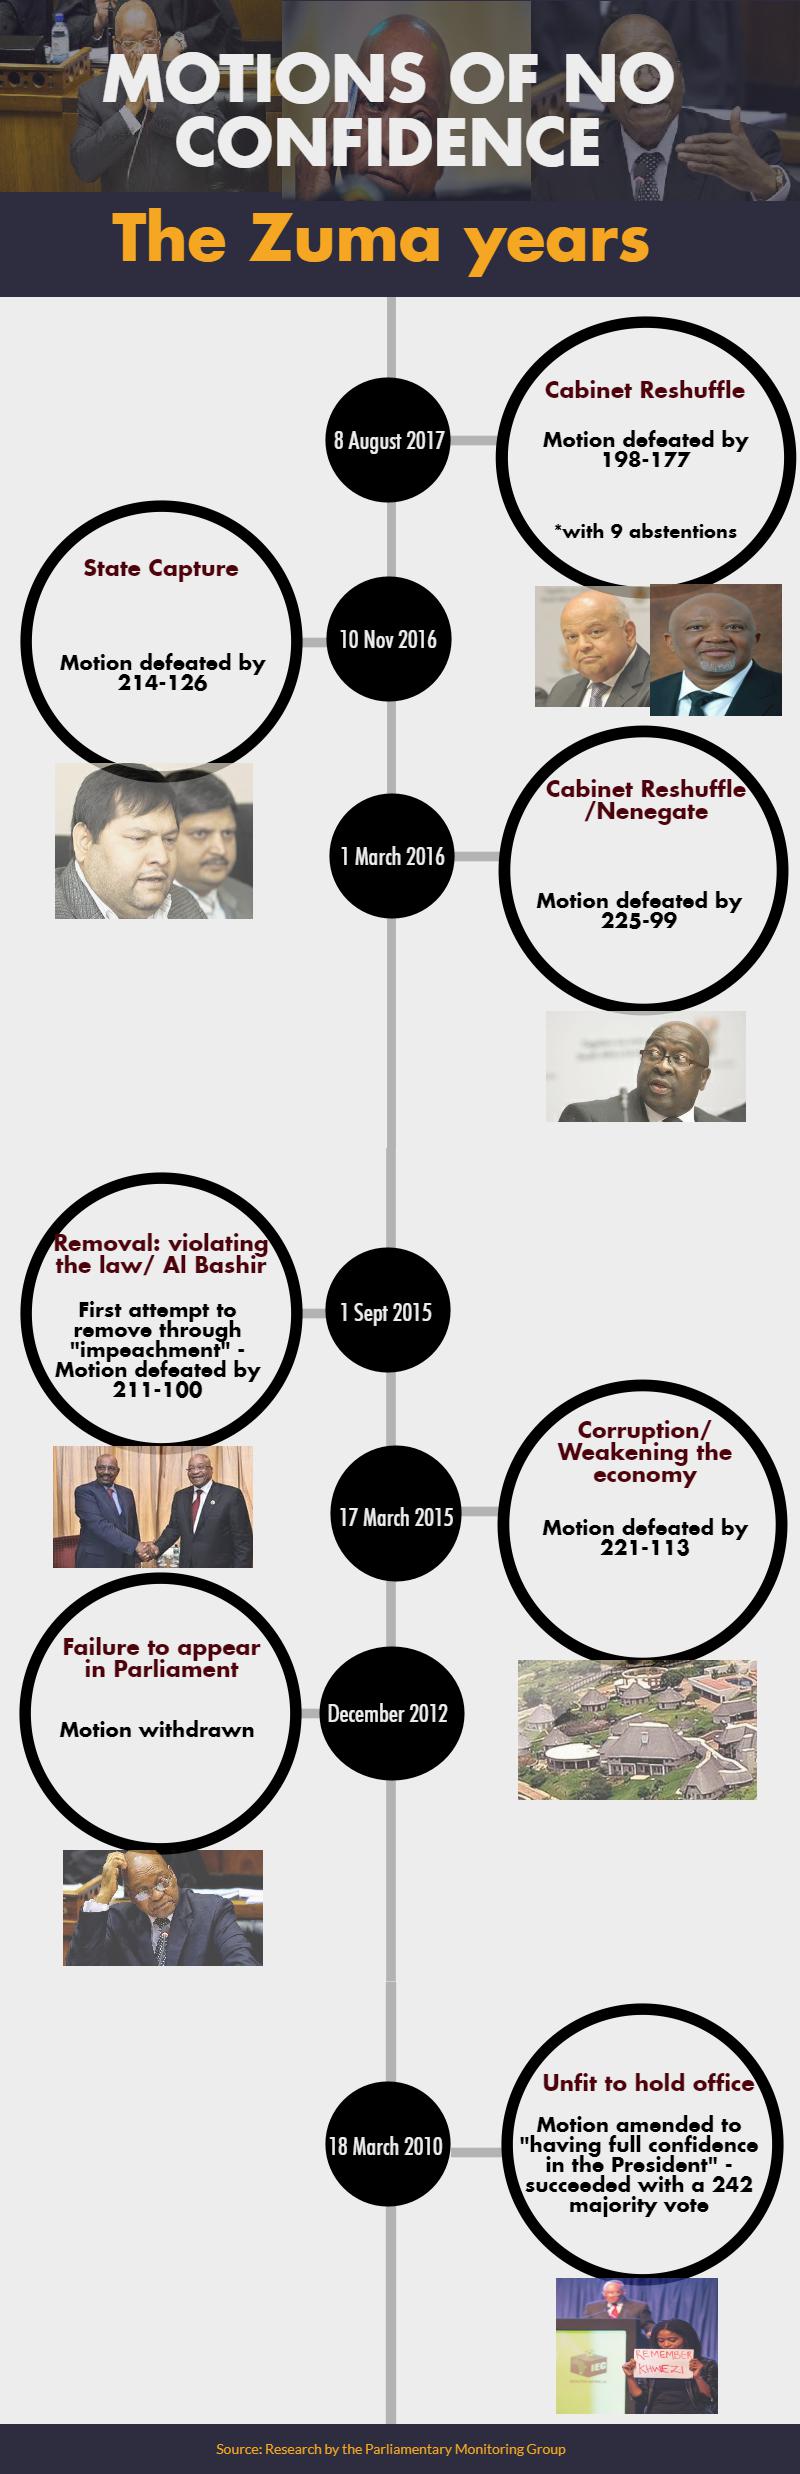 Infographic: Motions of no confidence: The zuma years